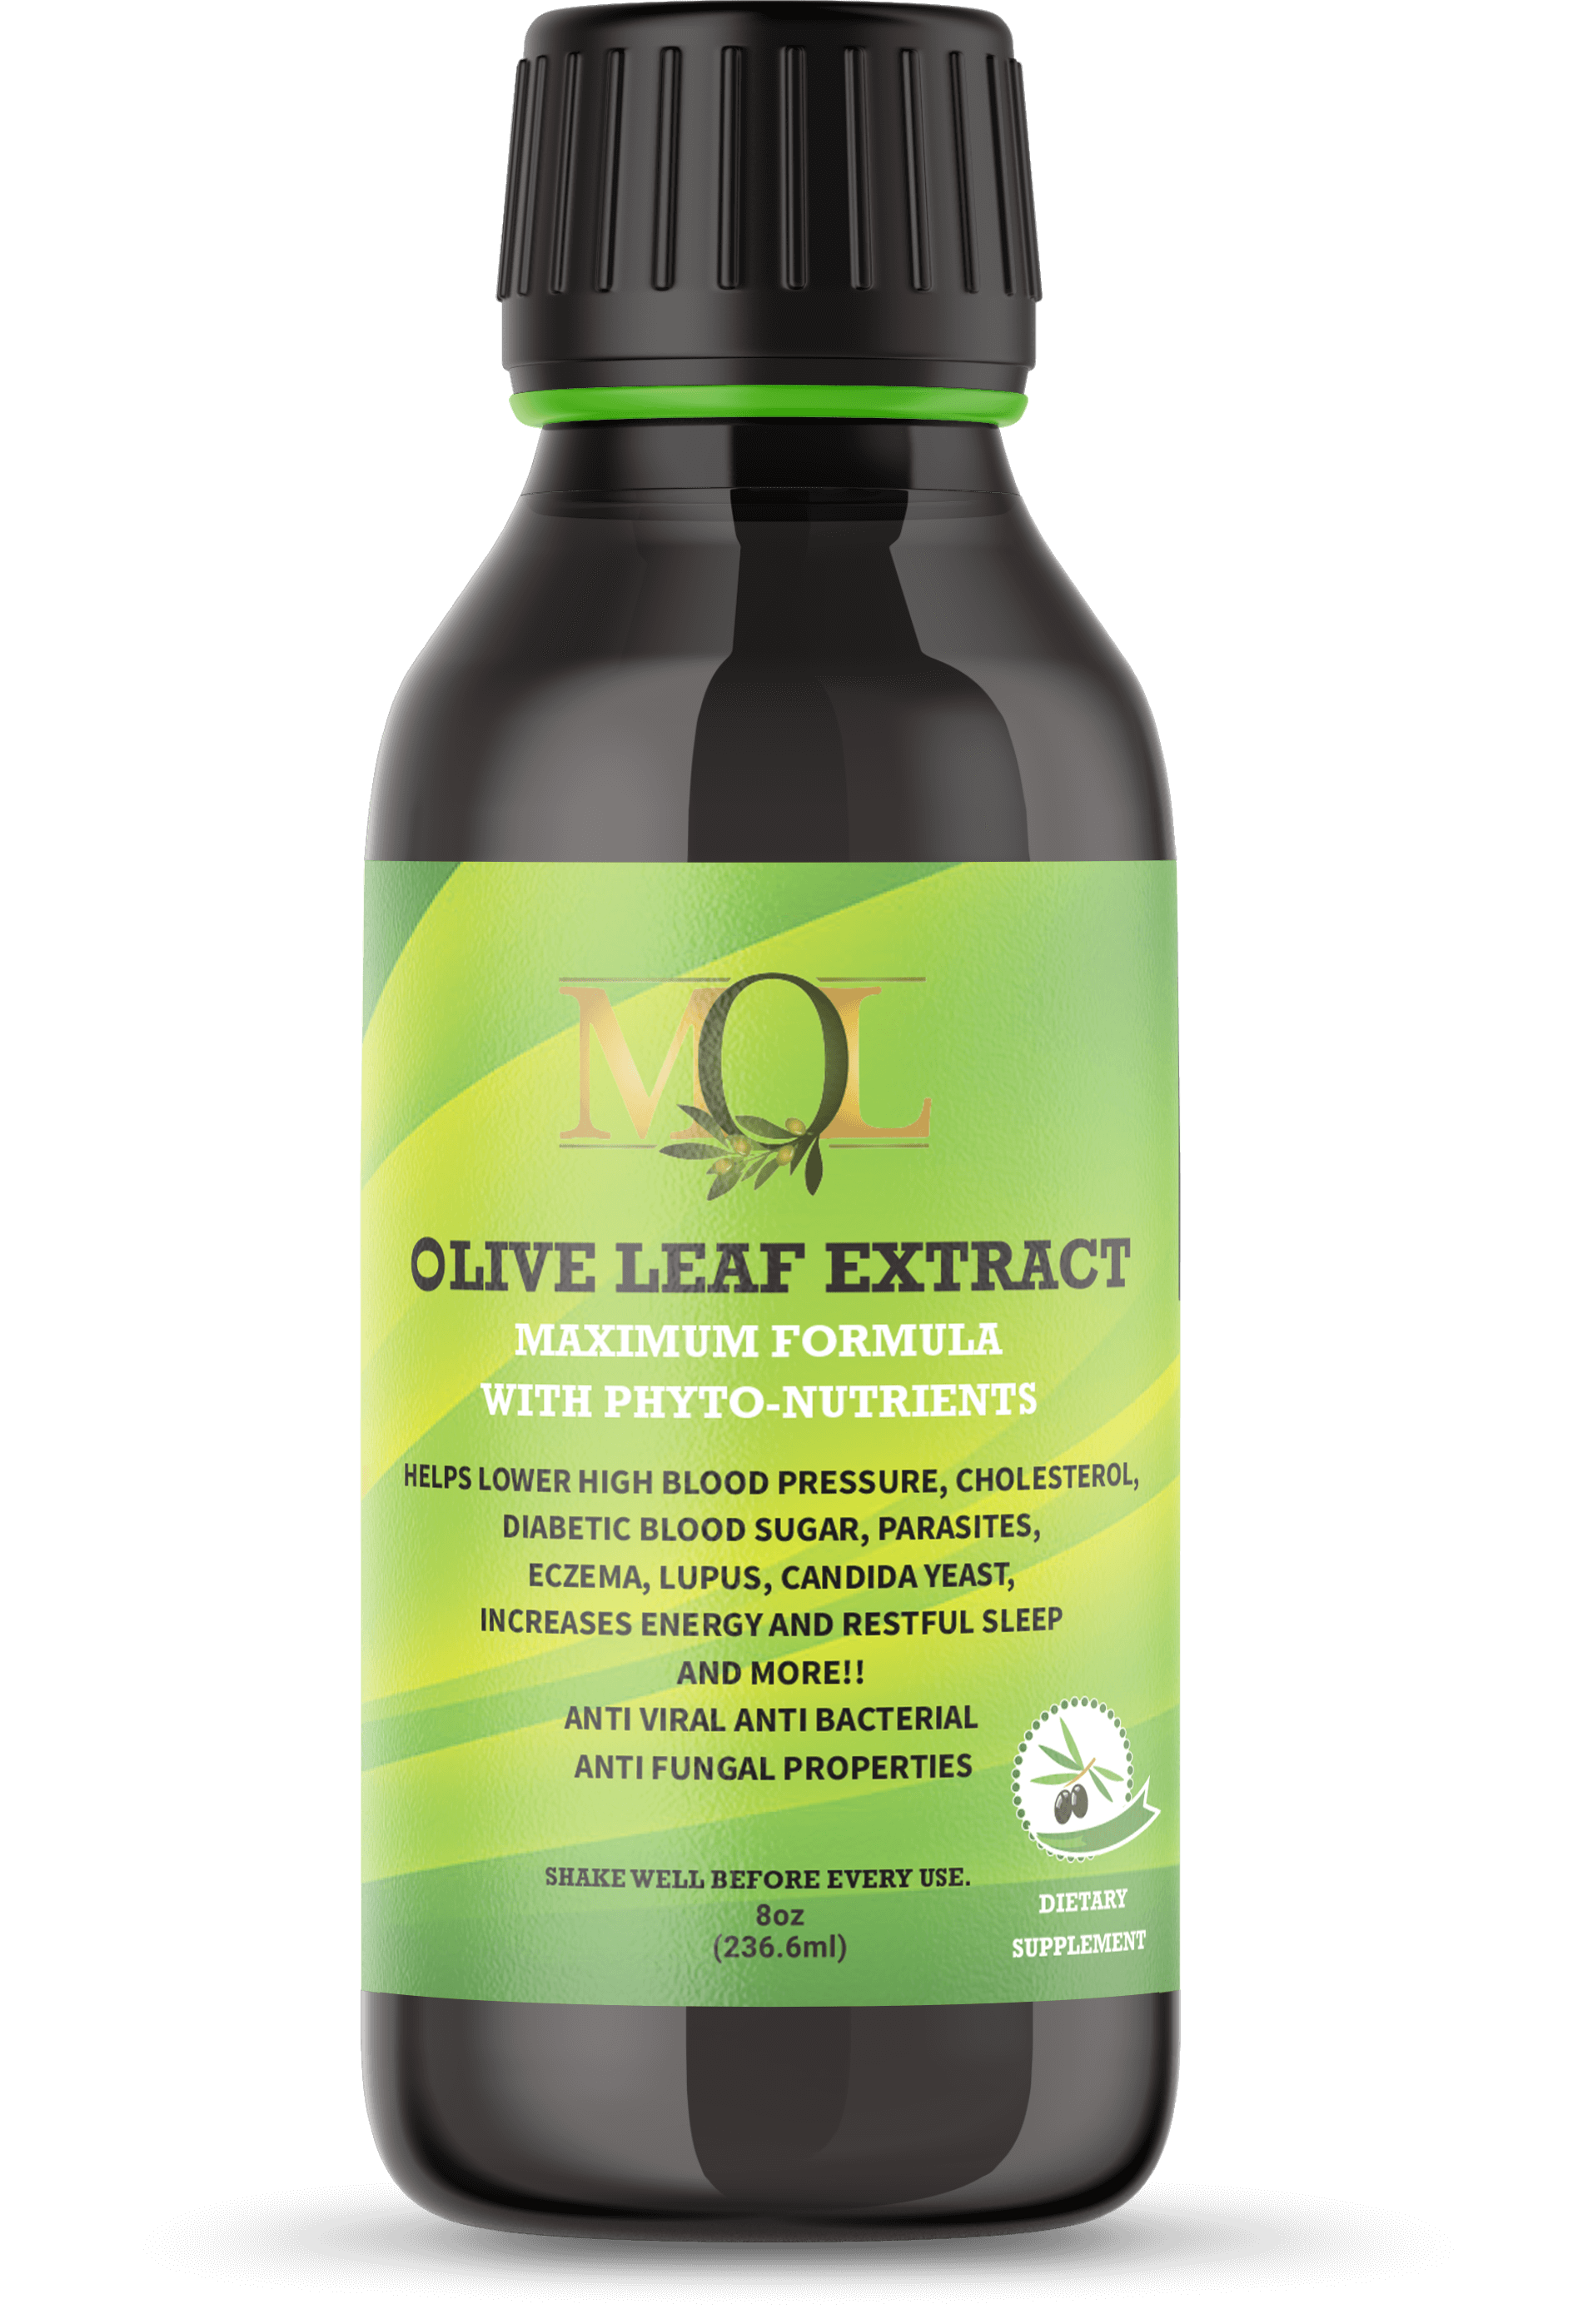 Olive Leaf Extract Maximum Formula with Phyto-Nutrients 16oz - My Olive Leaf